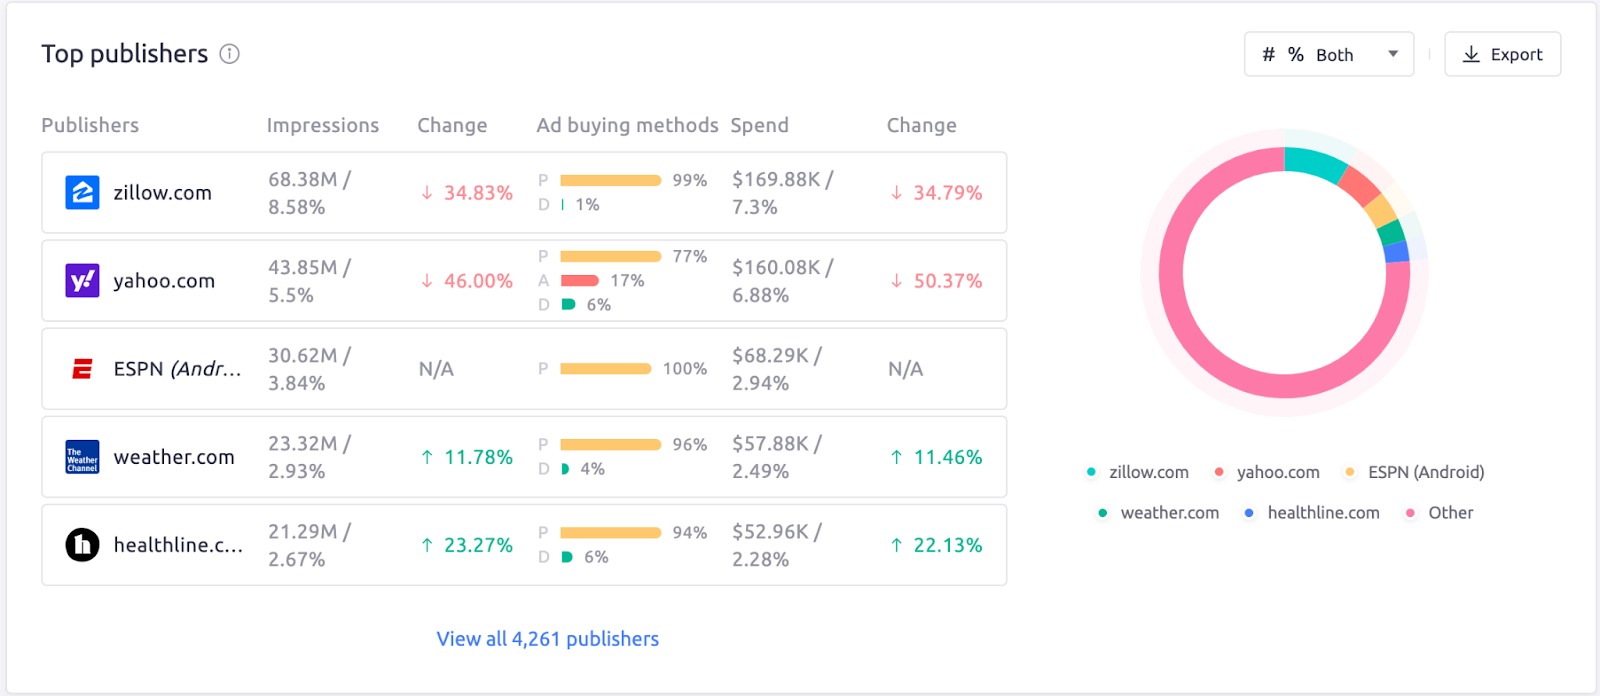 AdClarity app. The Top publishers widget showing metrics such as publishers, impressions, ad buying methods, spend, change. 